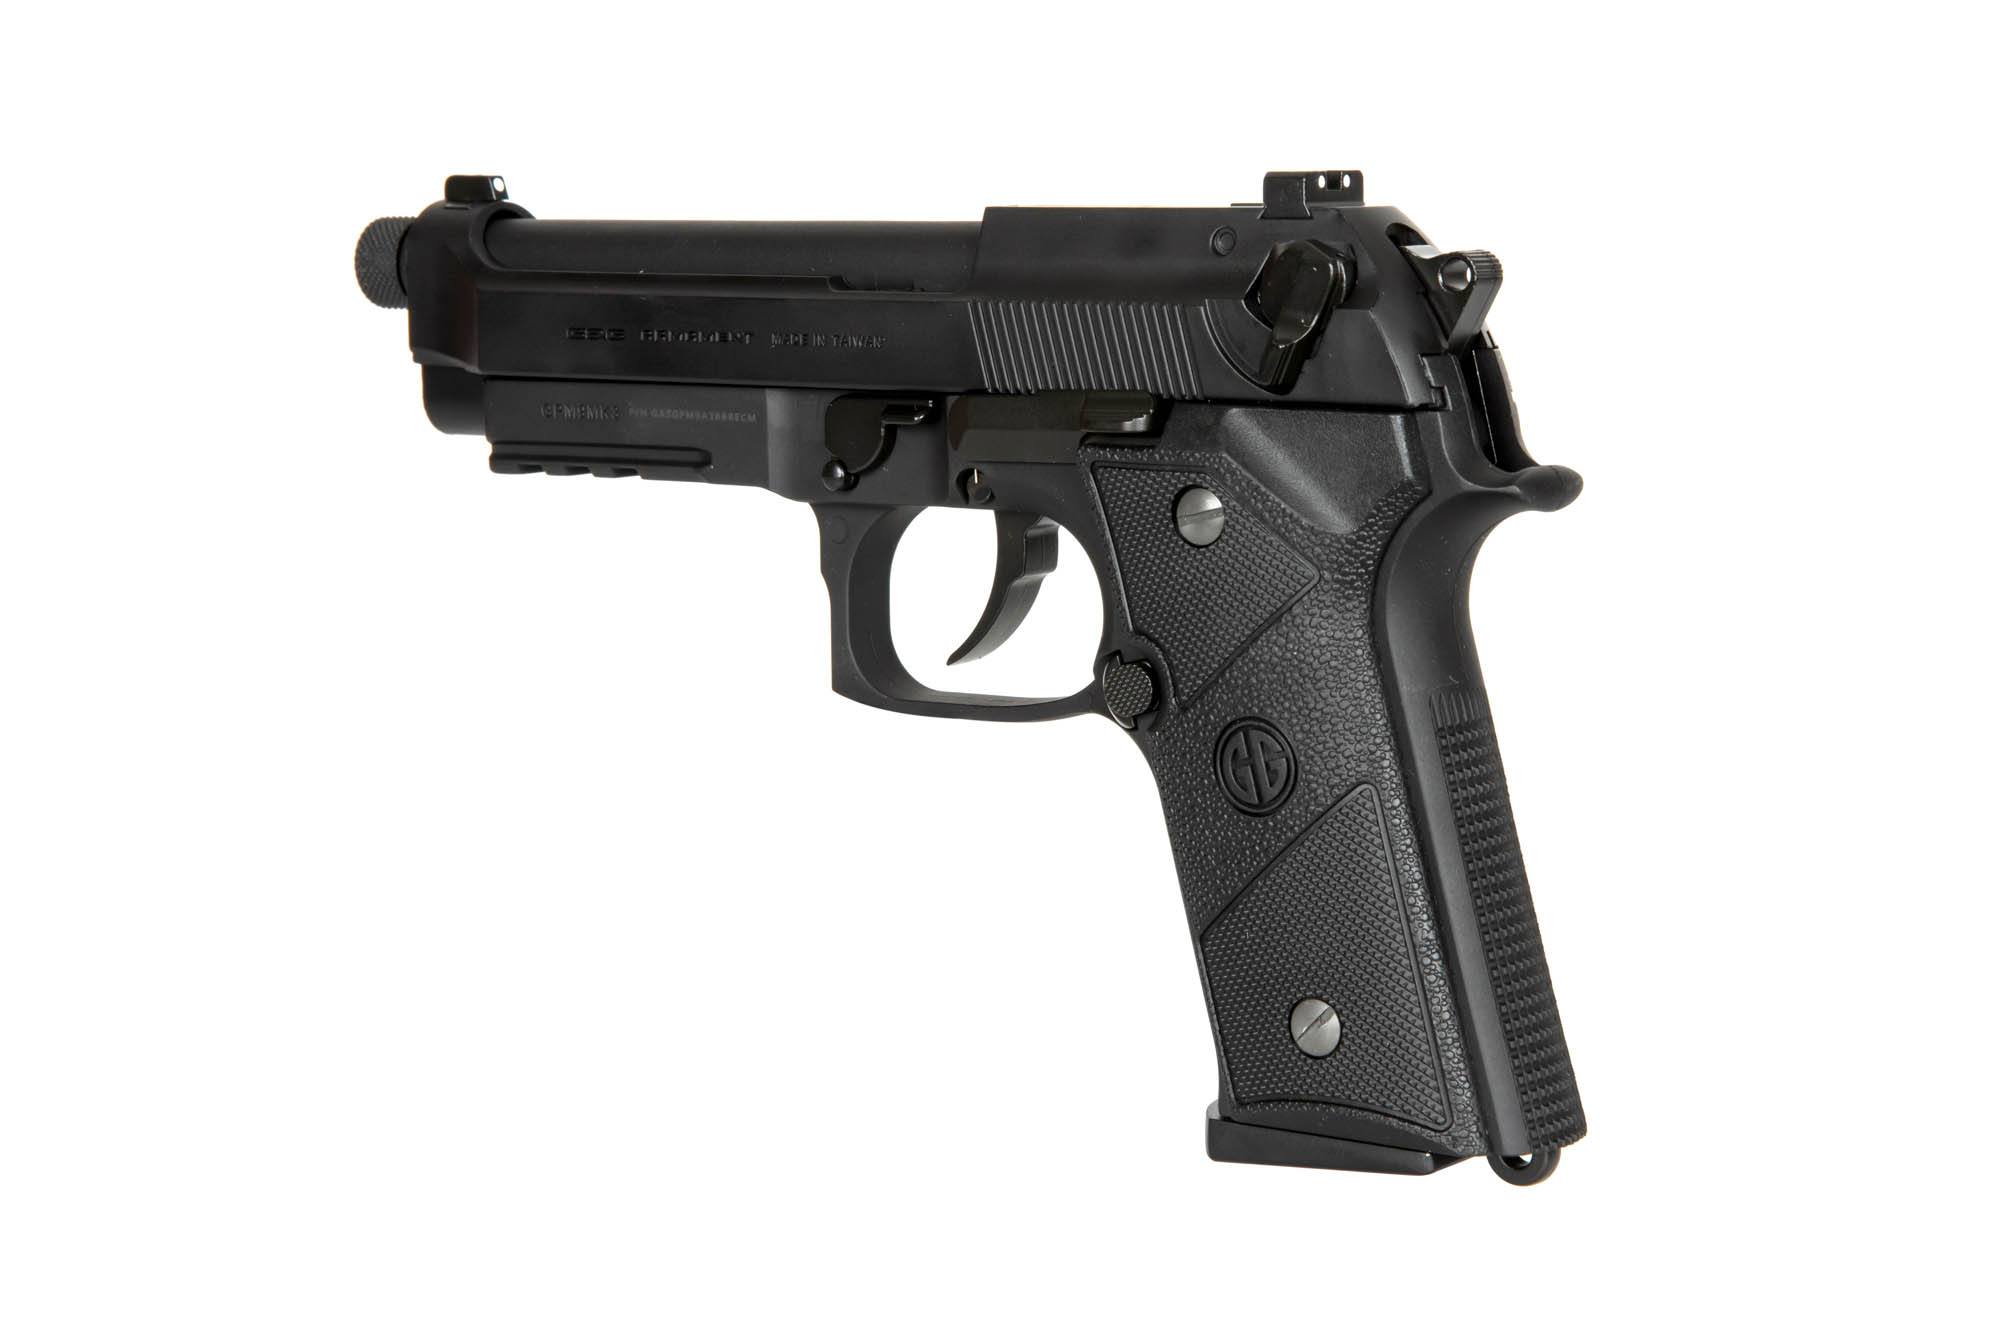 GPM9 MK3 Pistol Replica - Black by G&G on Airsoft Mania Europe